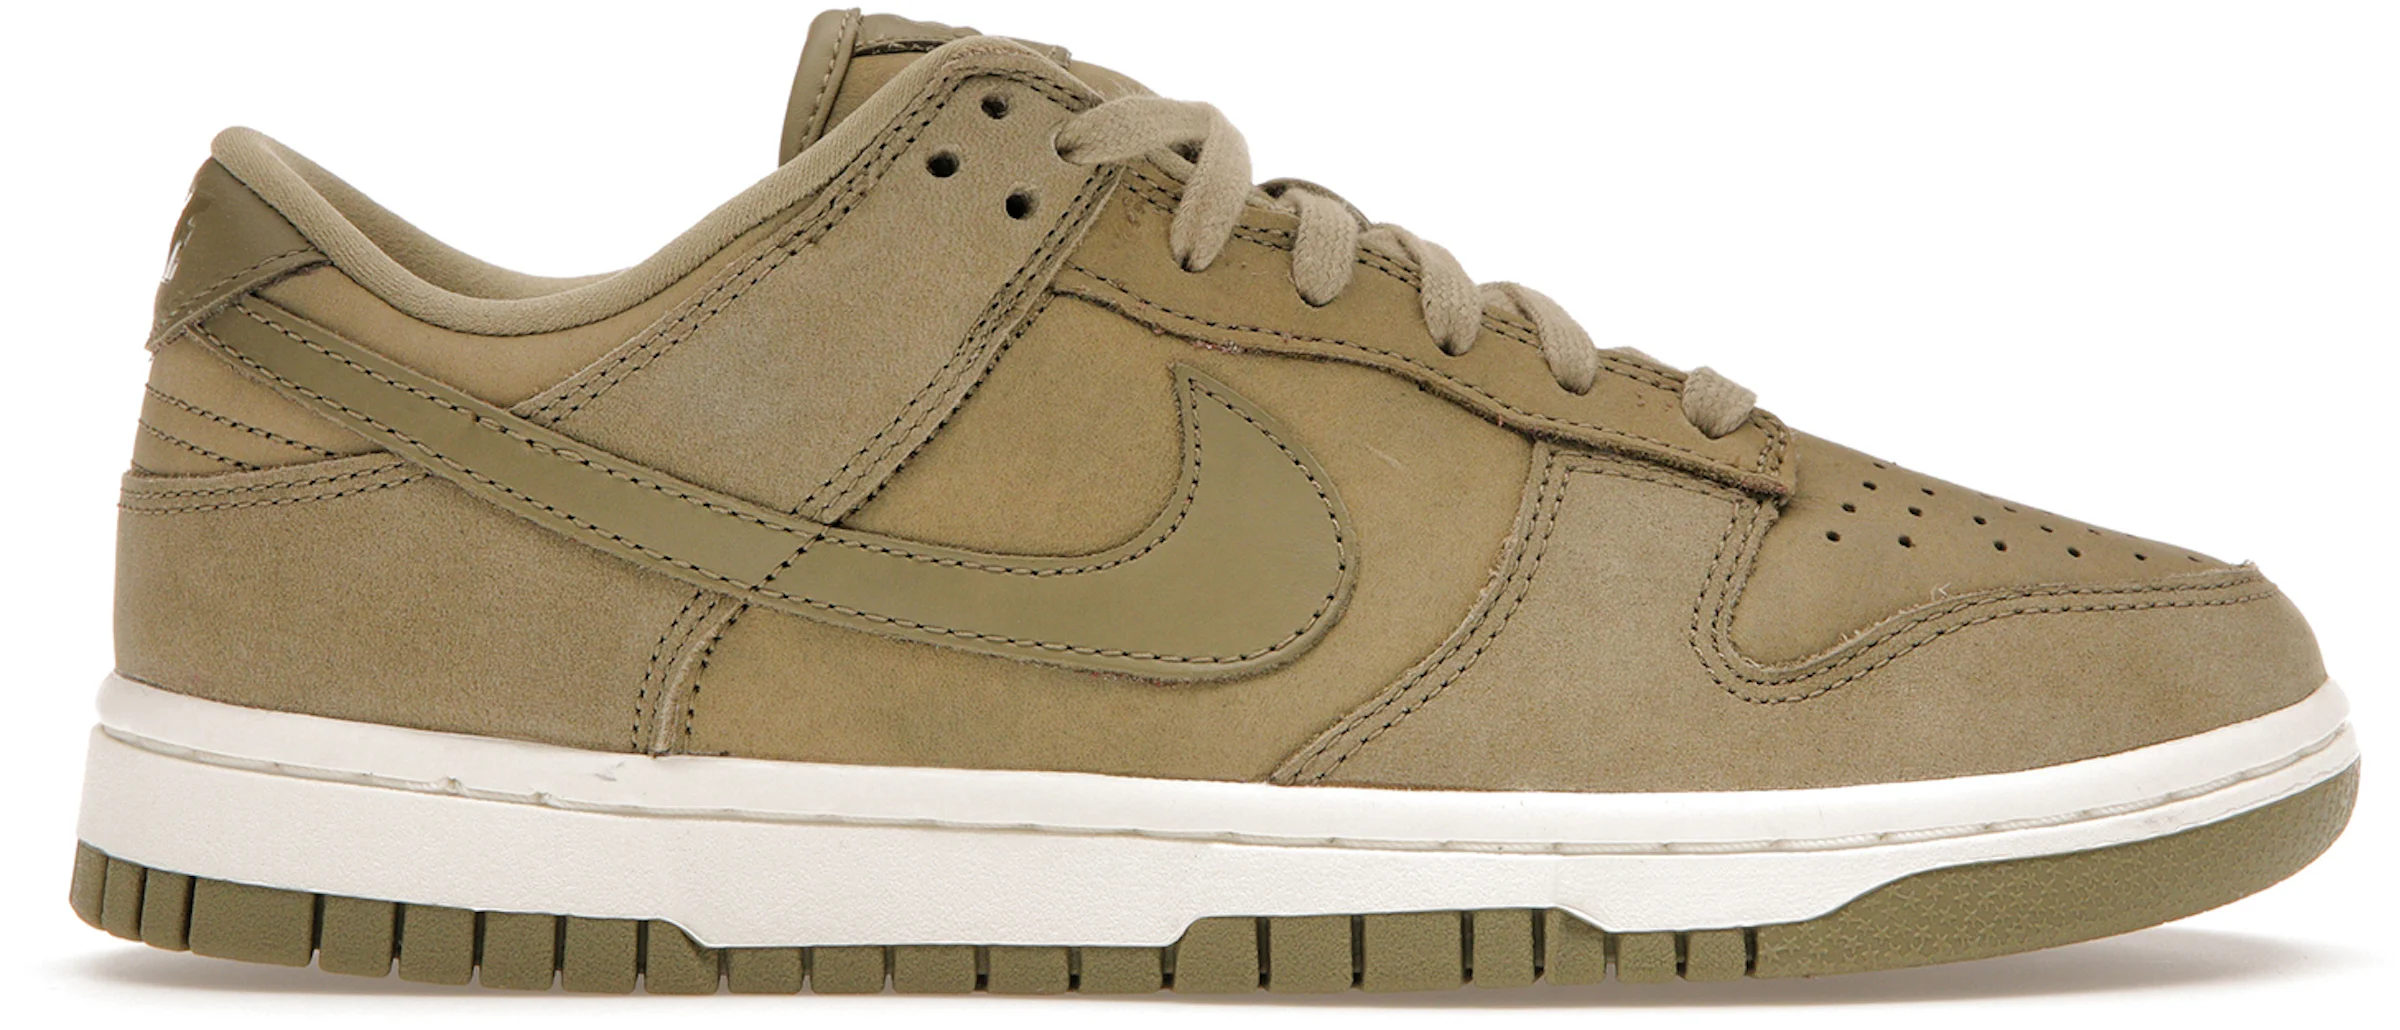 First Look at the Nike Dunk Low Medium Olive